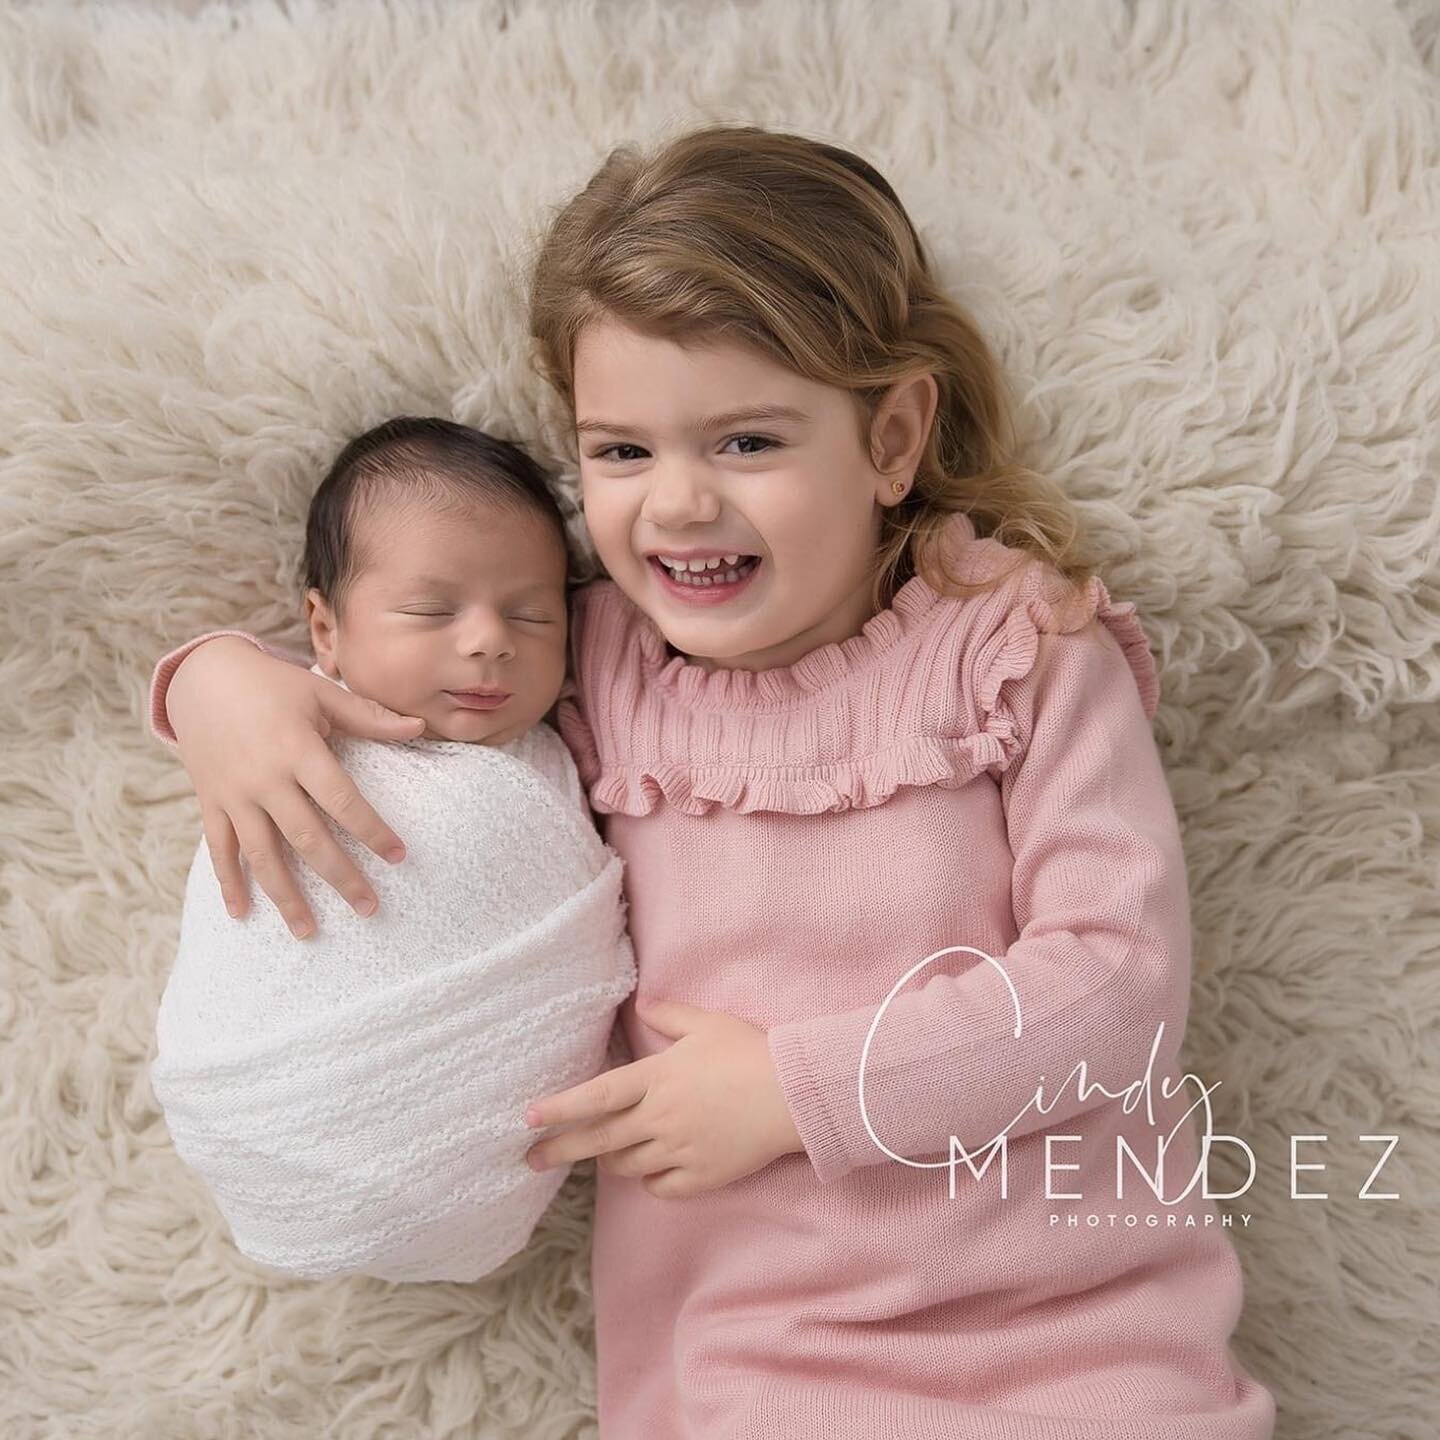 Love it when families come back when their family grows! How cute is that custom score board? 
#cindymendezphotography #newbornphotography #newbornphotographer #newbornphotographers #newborn #newborns #baby #babies #newbornpictures #newbornphotos #ba